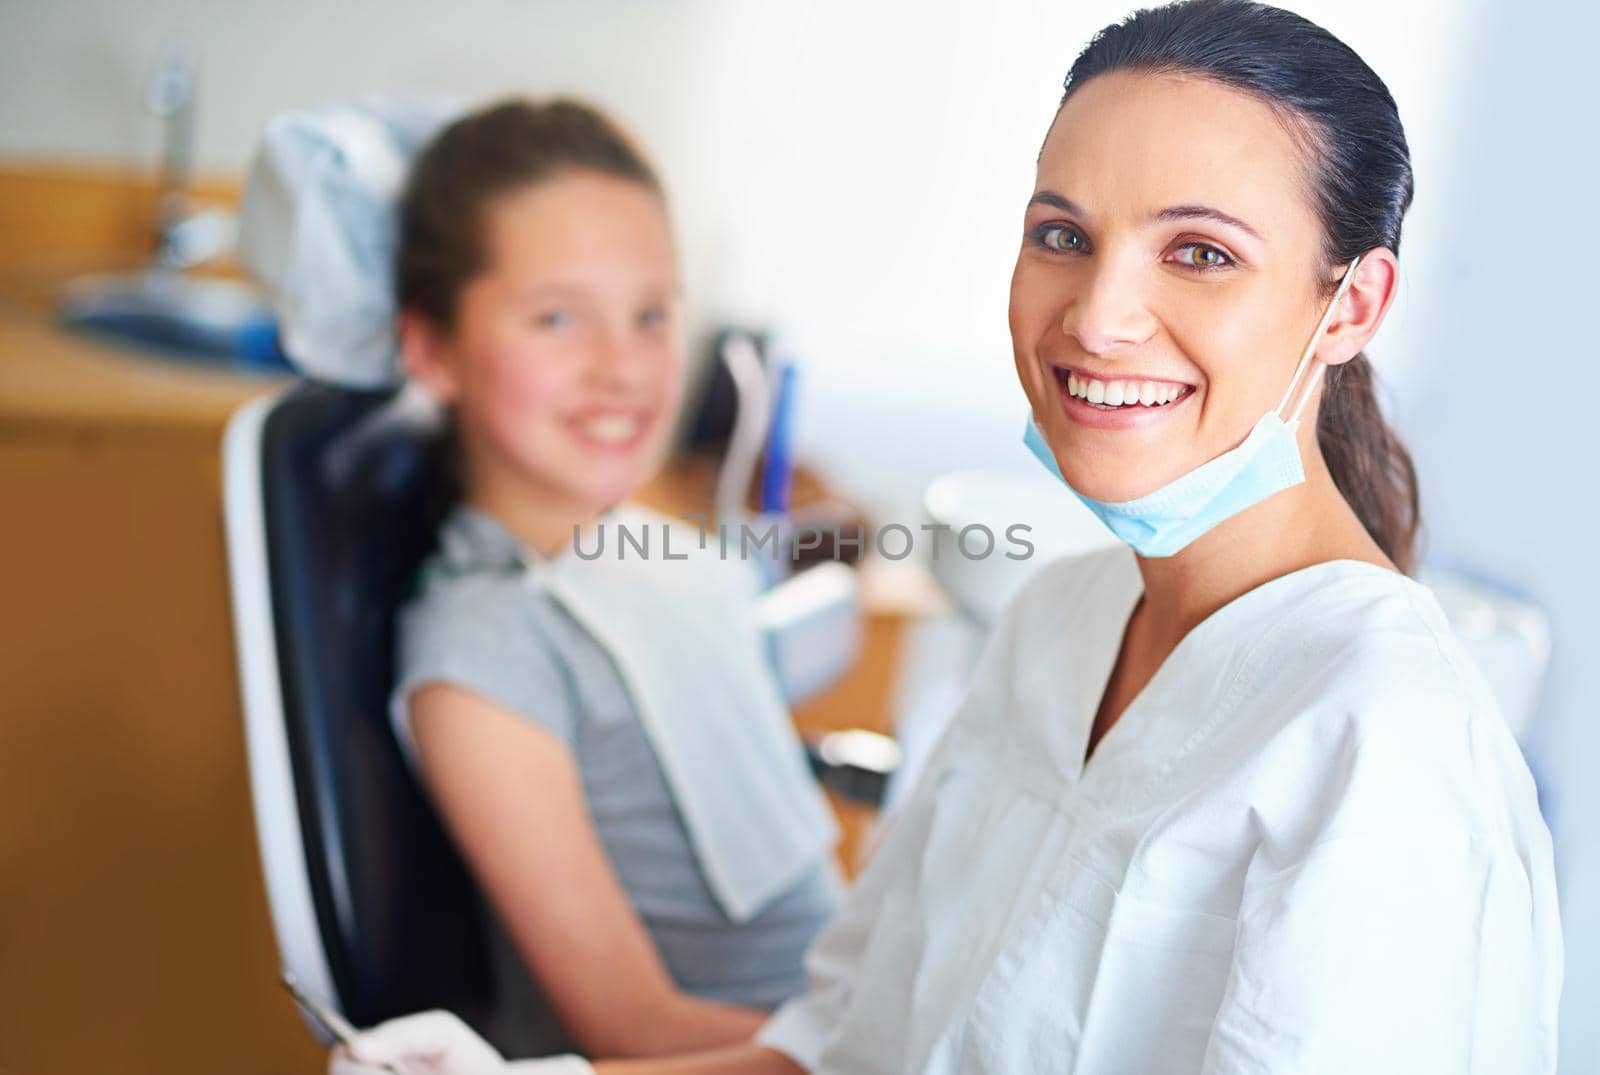 I always try to put my patients at ease. Portrait of a female dentist and child in a dentist office. by YuriArcurs